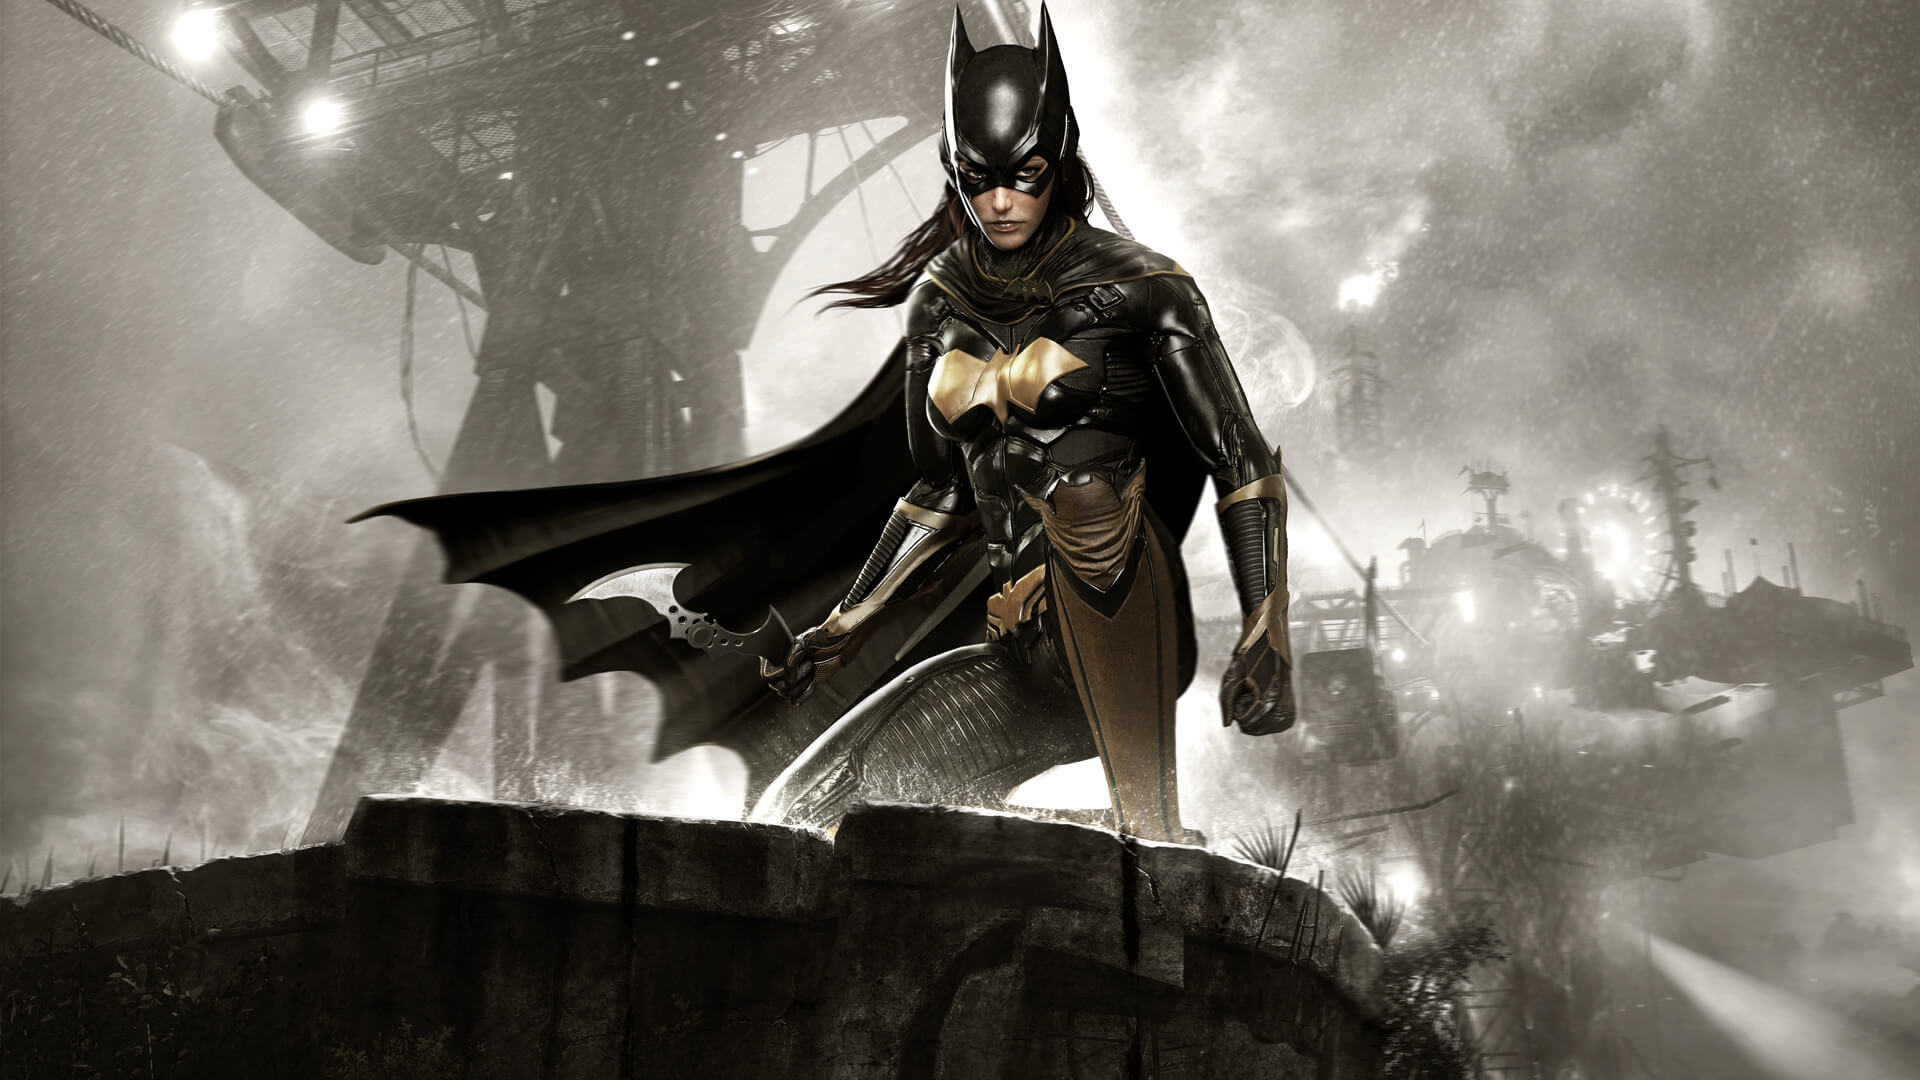 Walter Hamada is upset about Batgirl cancellation without his consult 